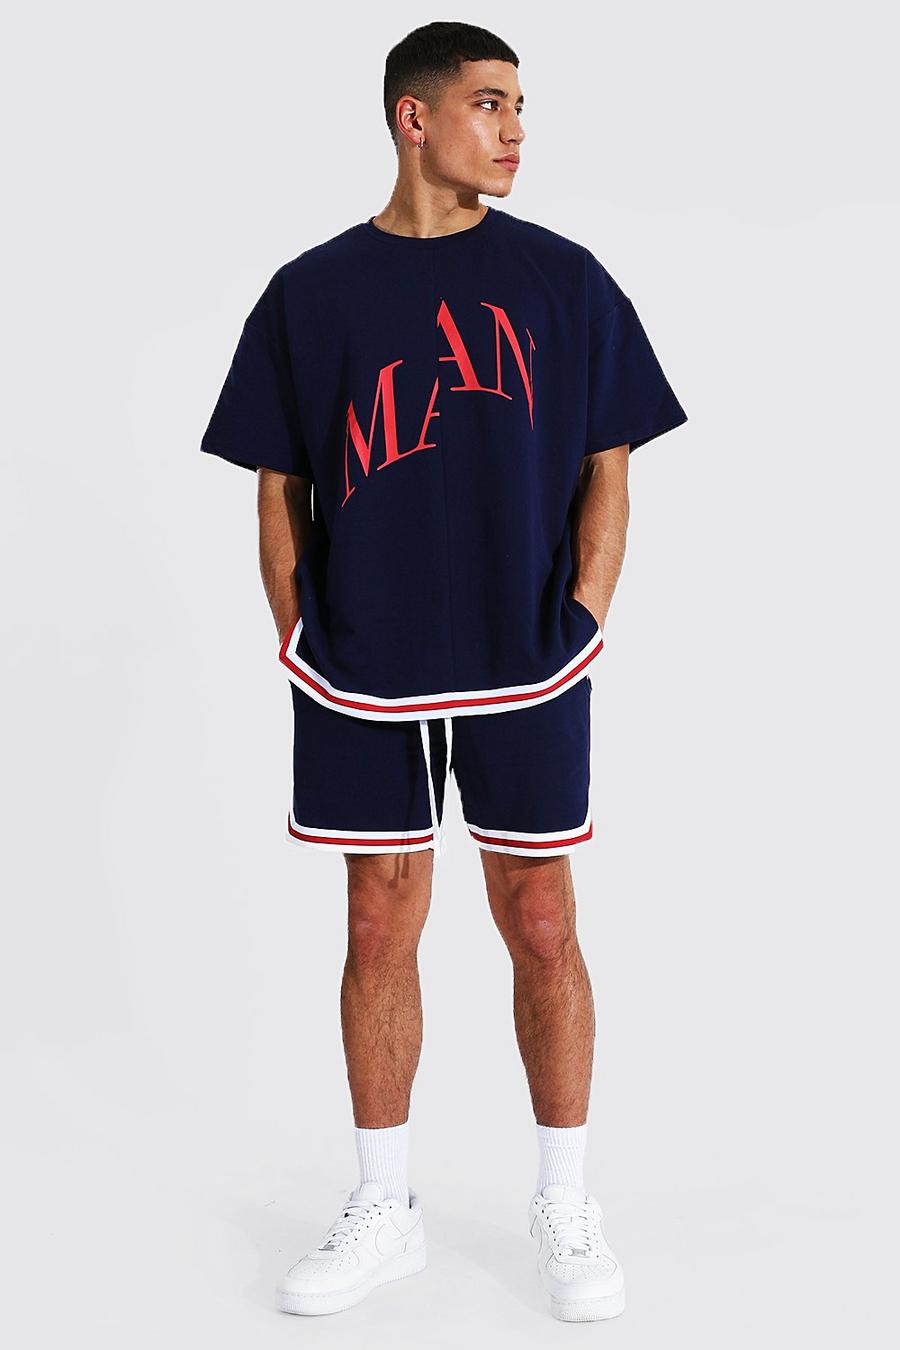 Navy Oversized Man Tape T-Shirt and Basketball image number 1